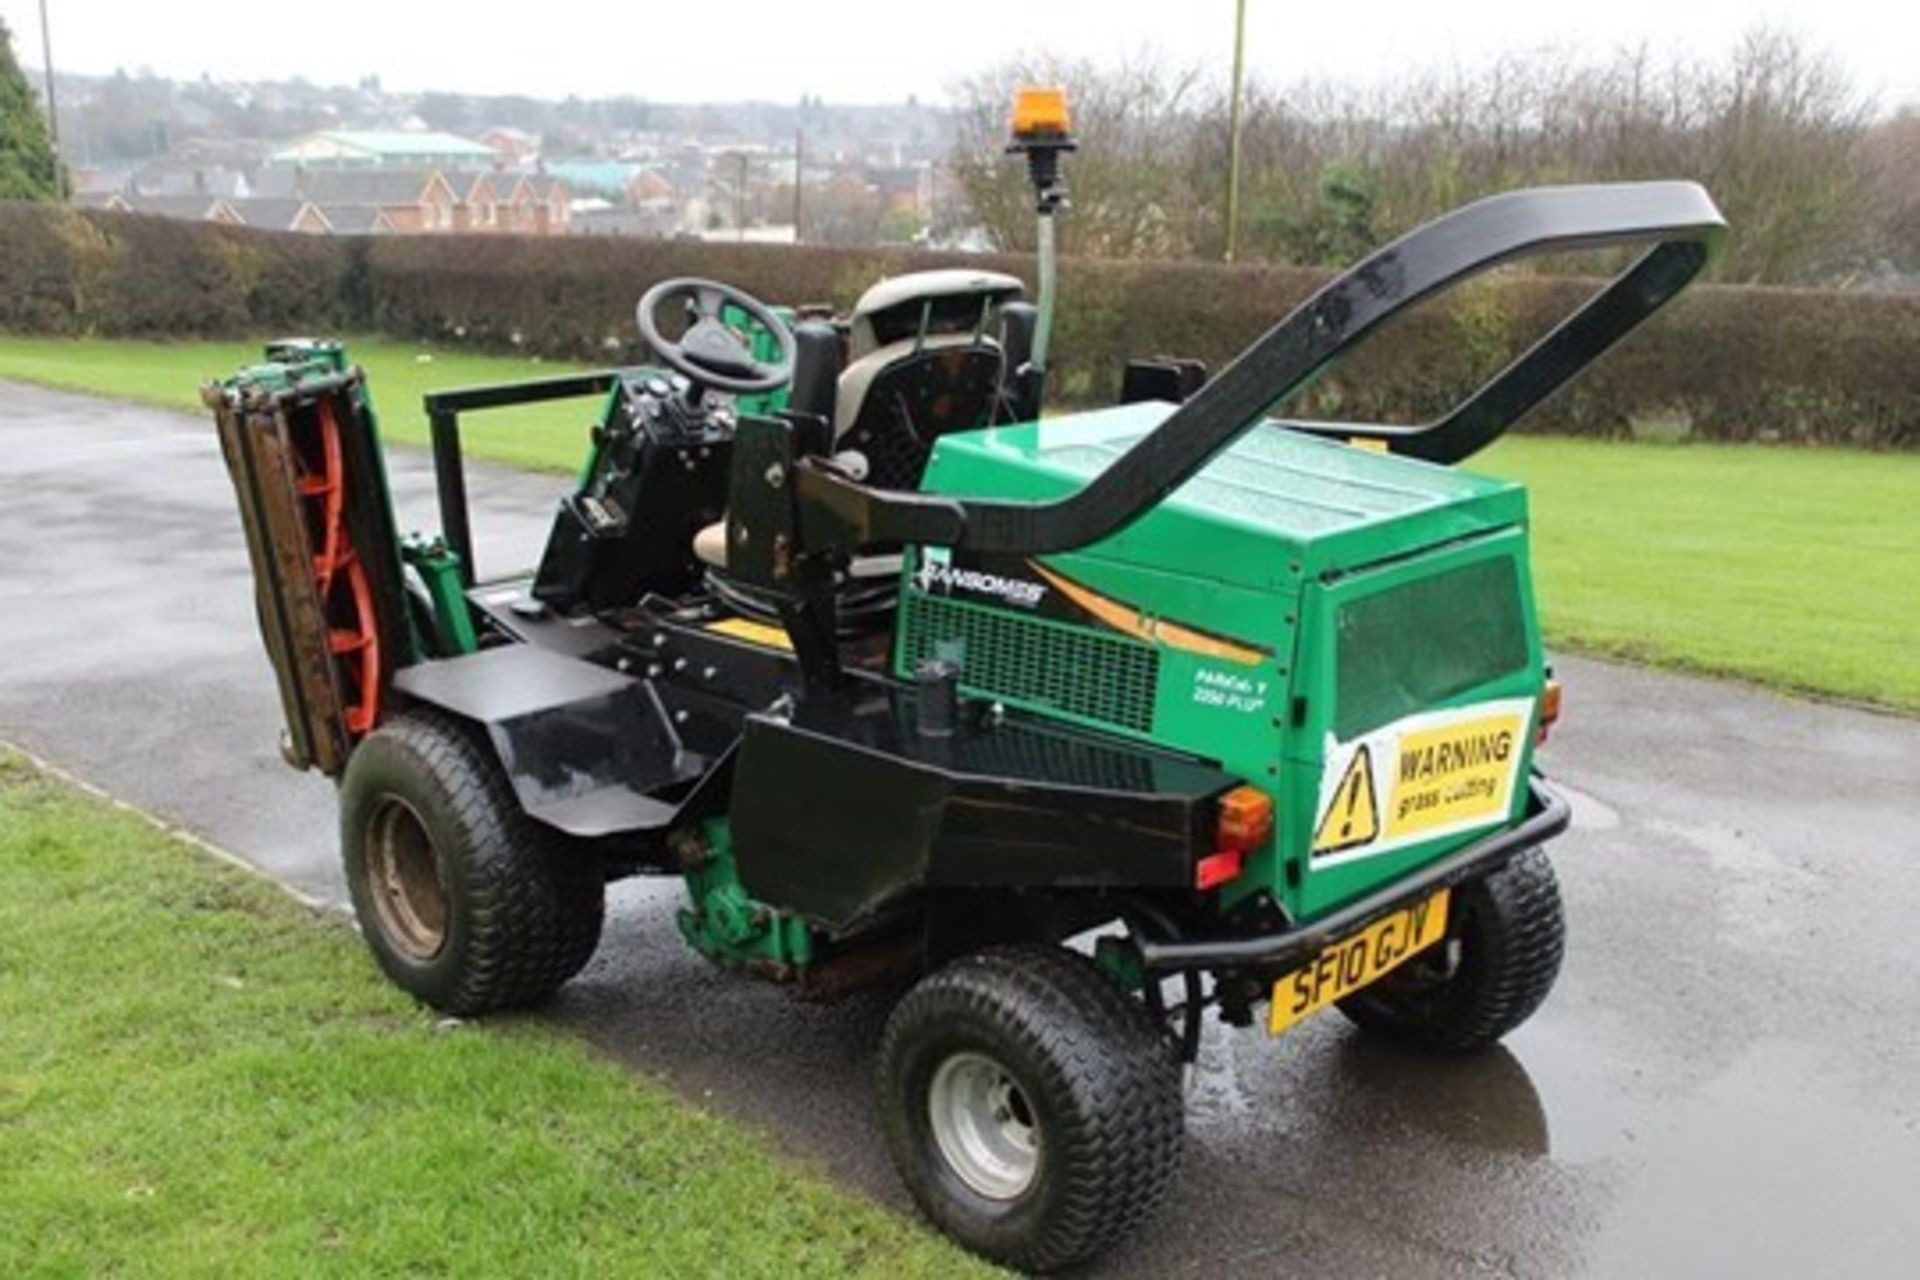 2010 Ransomes Parkway 2250 Plus Ride On Cylinder Mower - Image 3 of 8